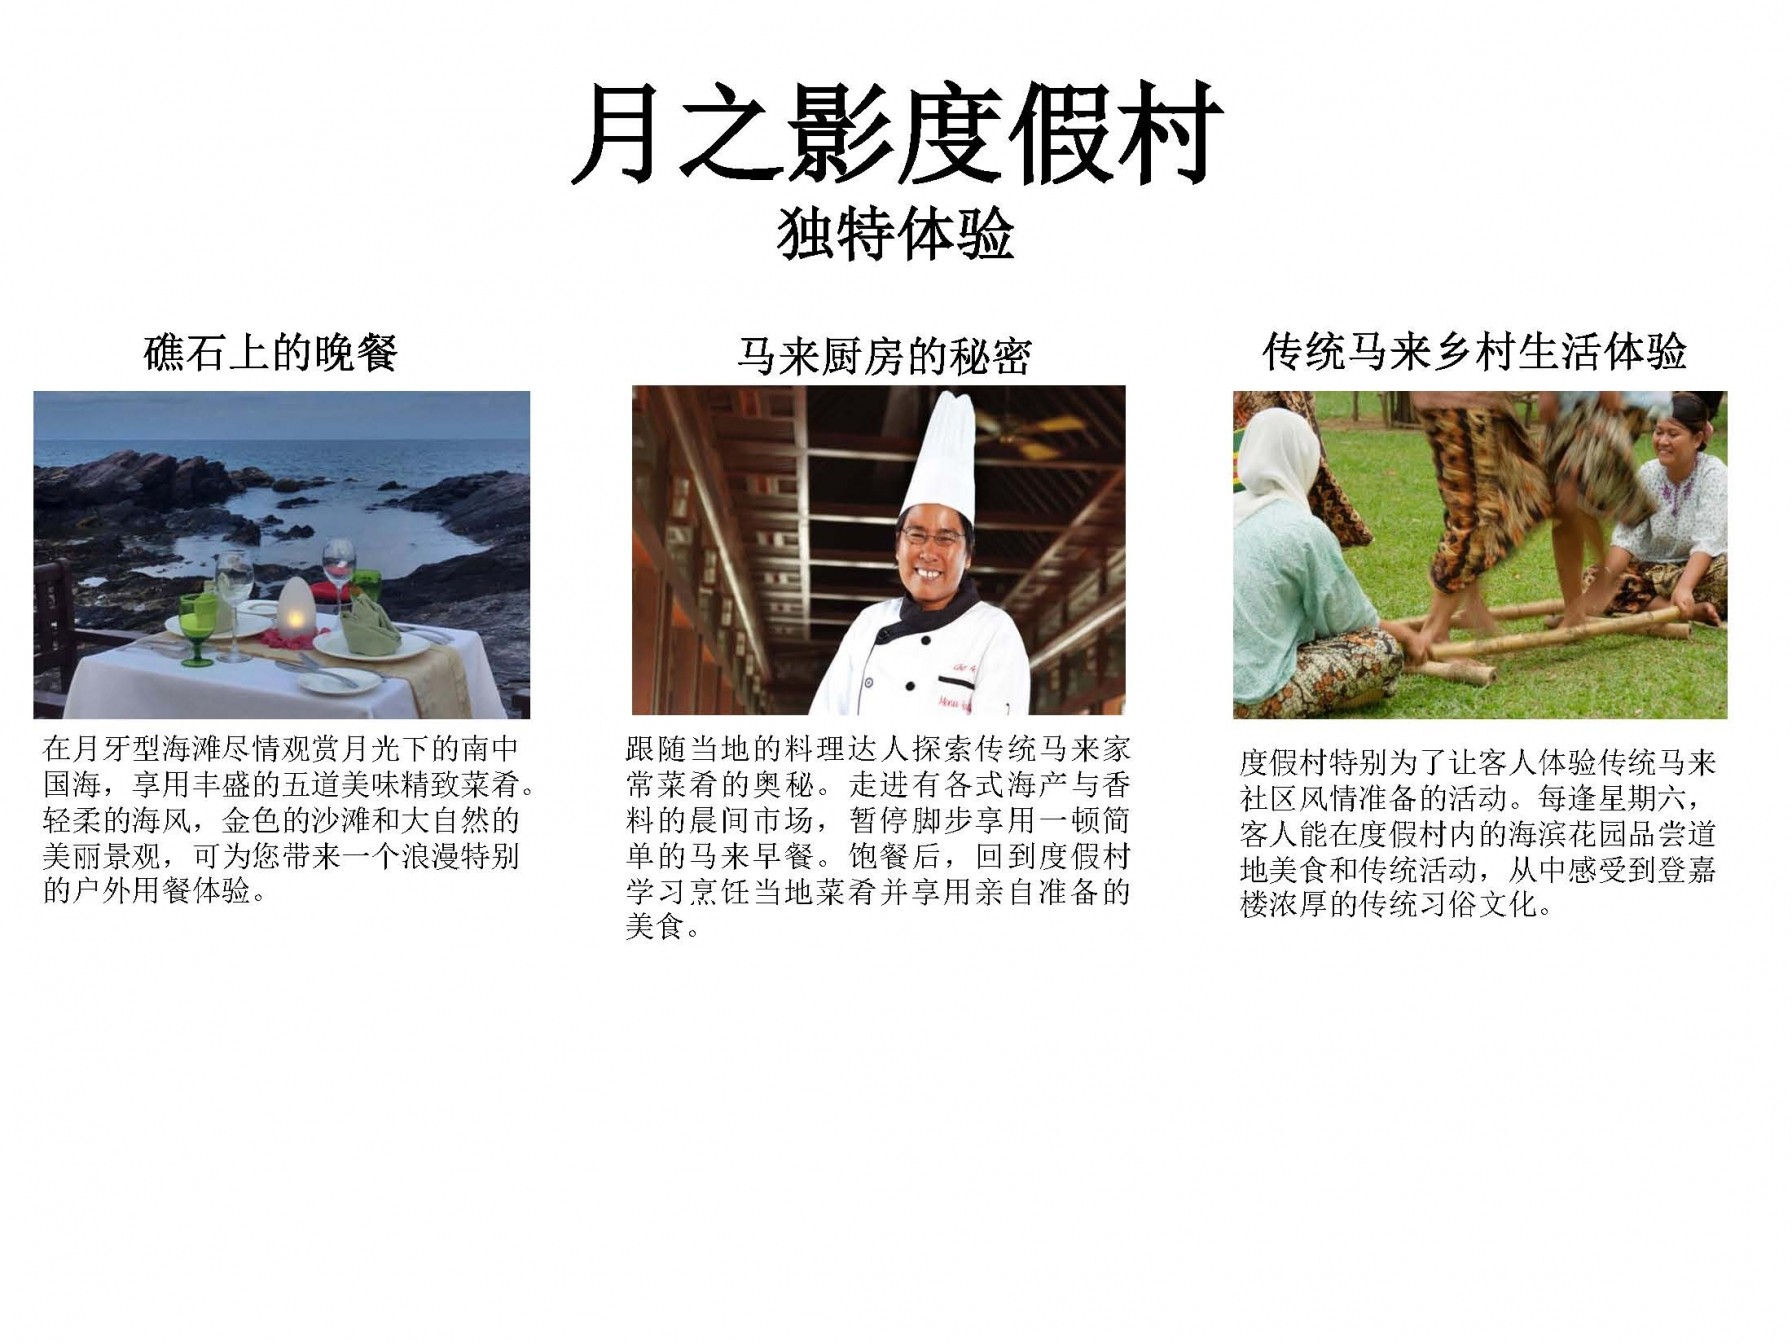 Pages from Malaysia &amp; Bali Presentation ǺͰ嵺ȼٴ_Page_6.jpg